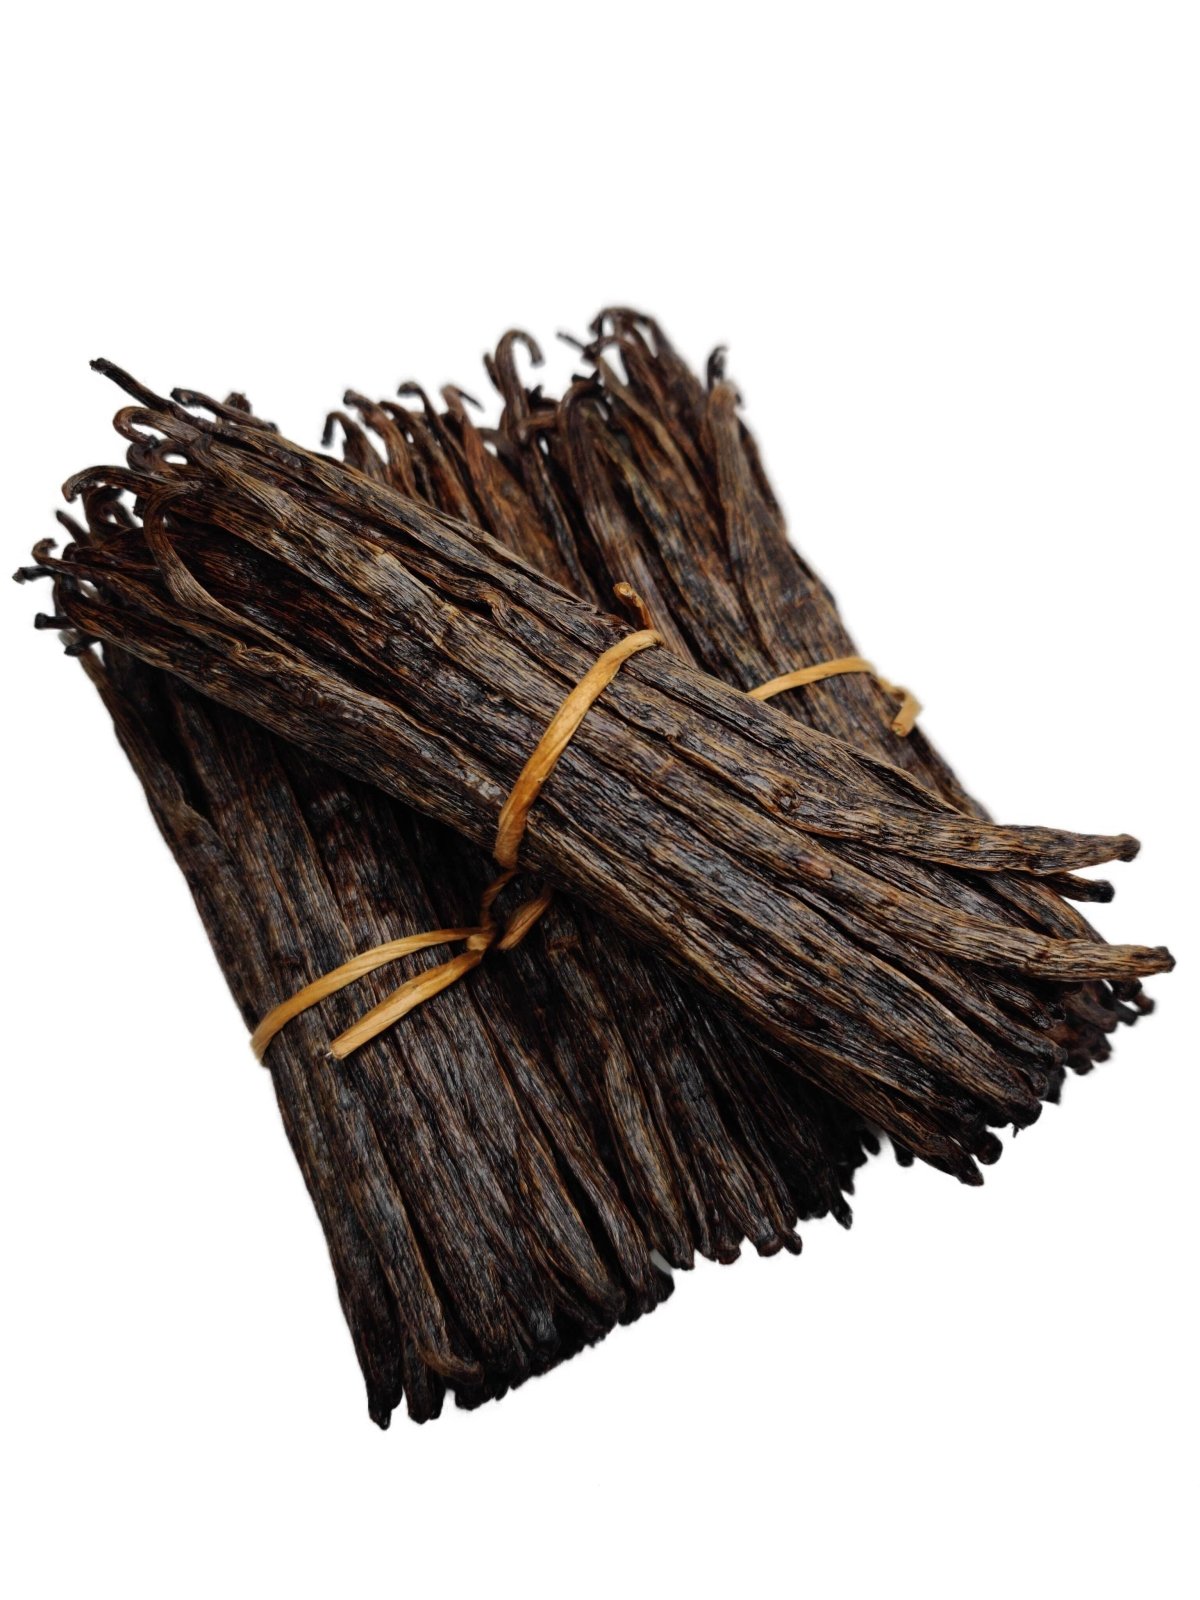 Co-op Pricing Ugandan Extract Grade-B Vanilla Beans (Per Ounce)<br><br>Minimum Order quantity for this Co-op price is 2 ounces.